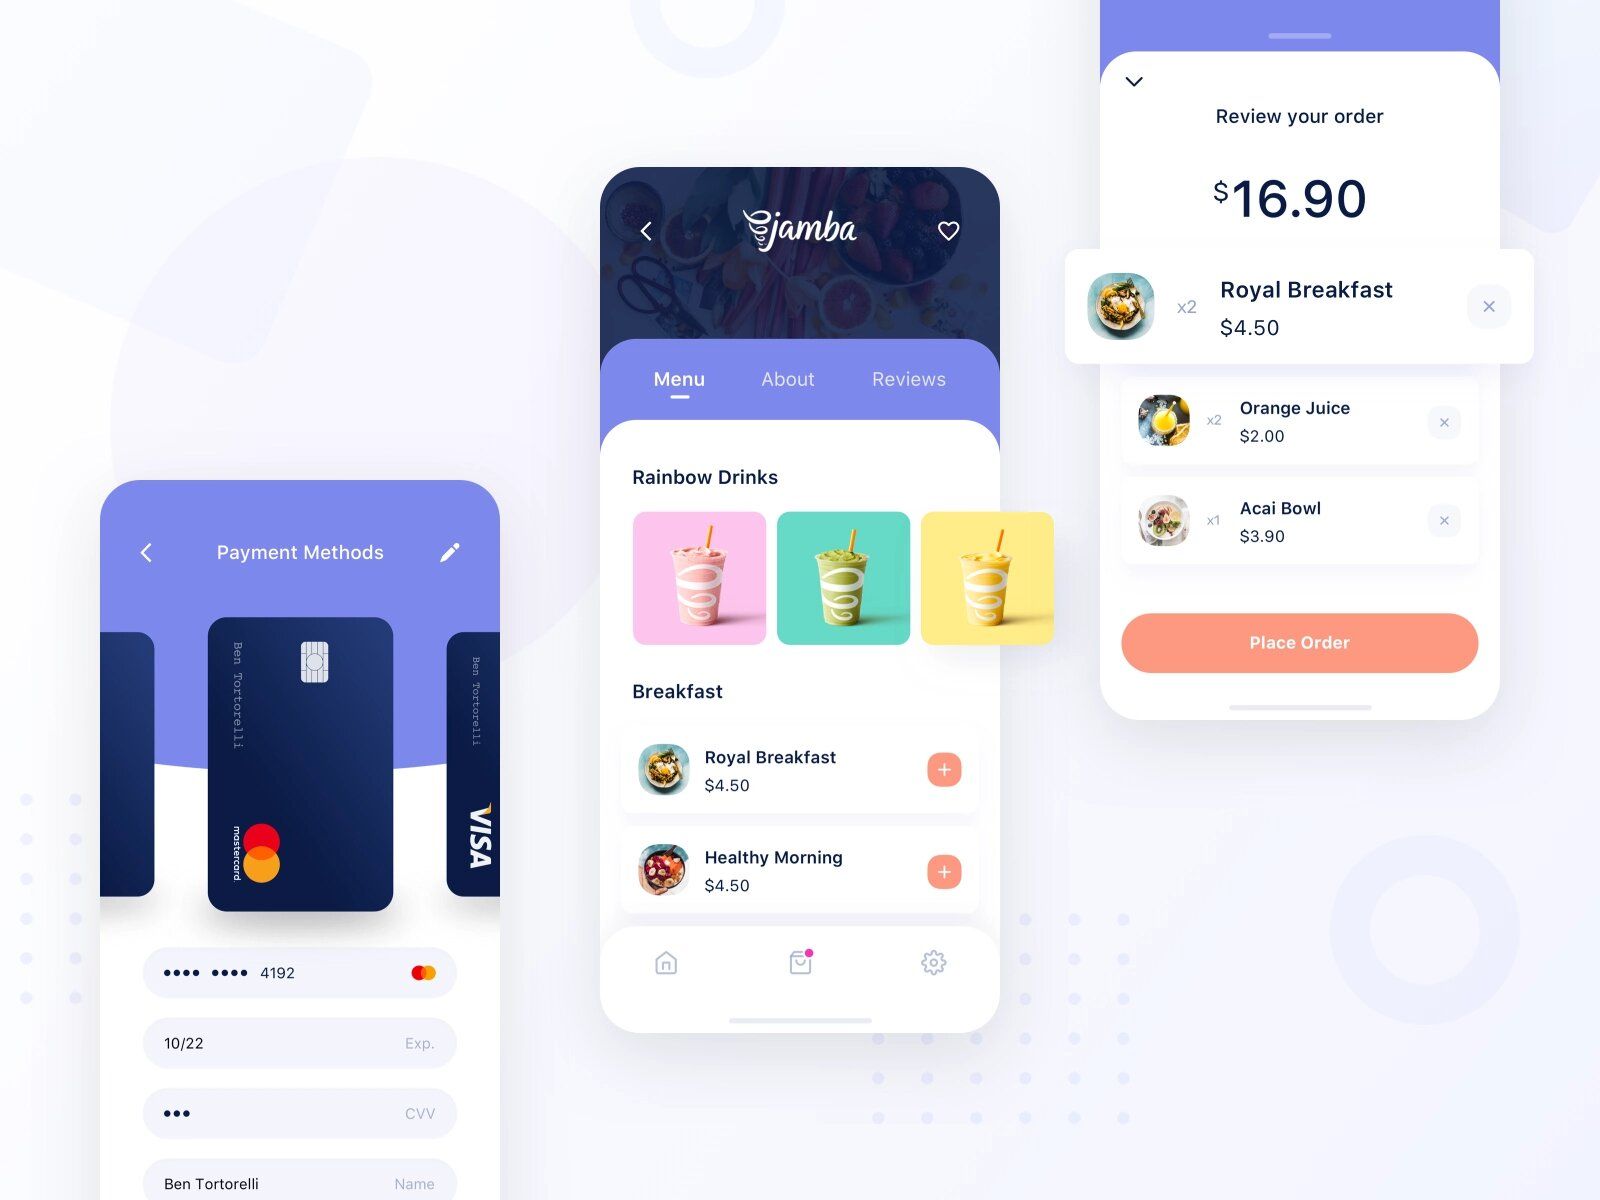 If you decide to create a food delivery app with online payment options, make sure to add secure payment gateway (*image by [Ben Tortorelli](https://dribbble.com/iamben){ rel="nofollow" target="_blank" .default-md}*)